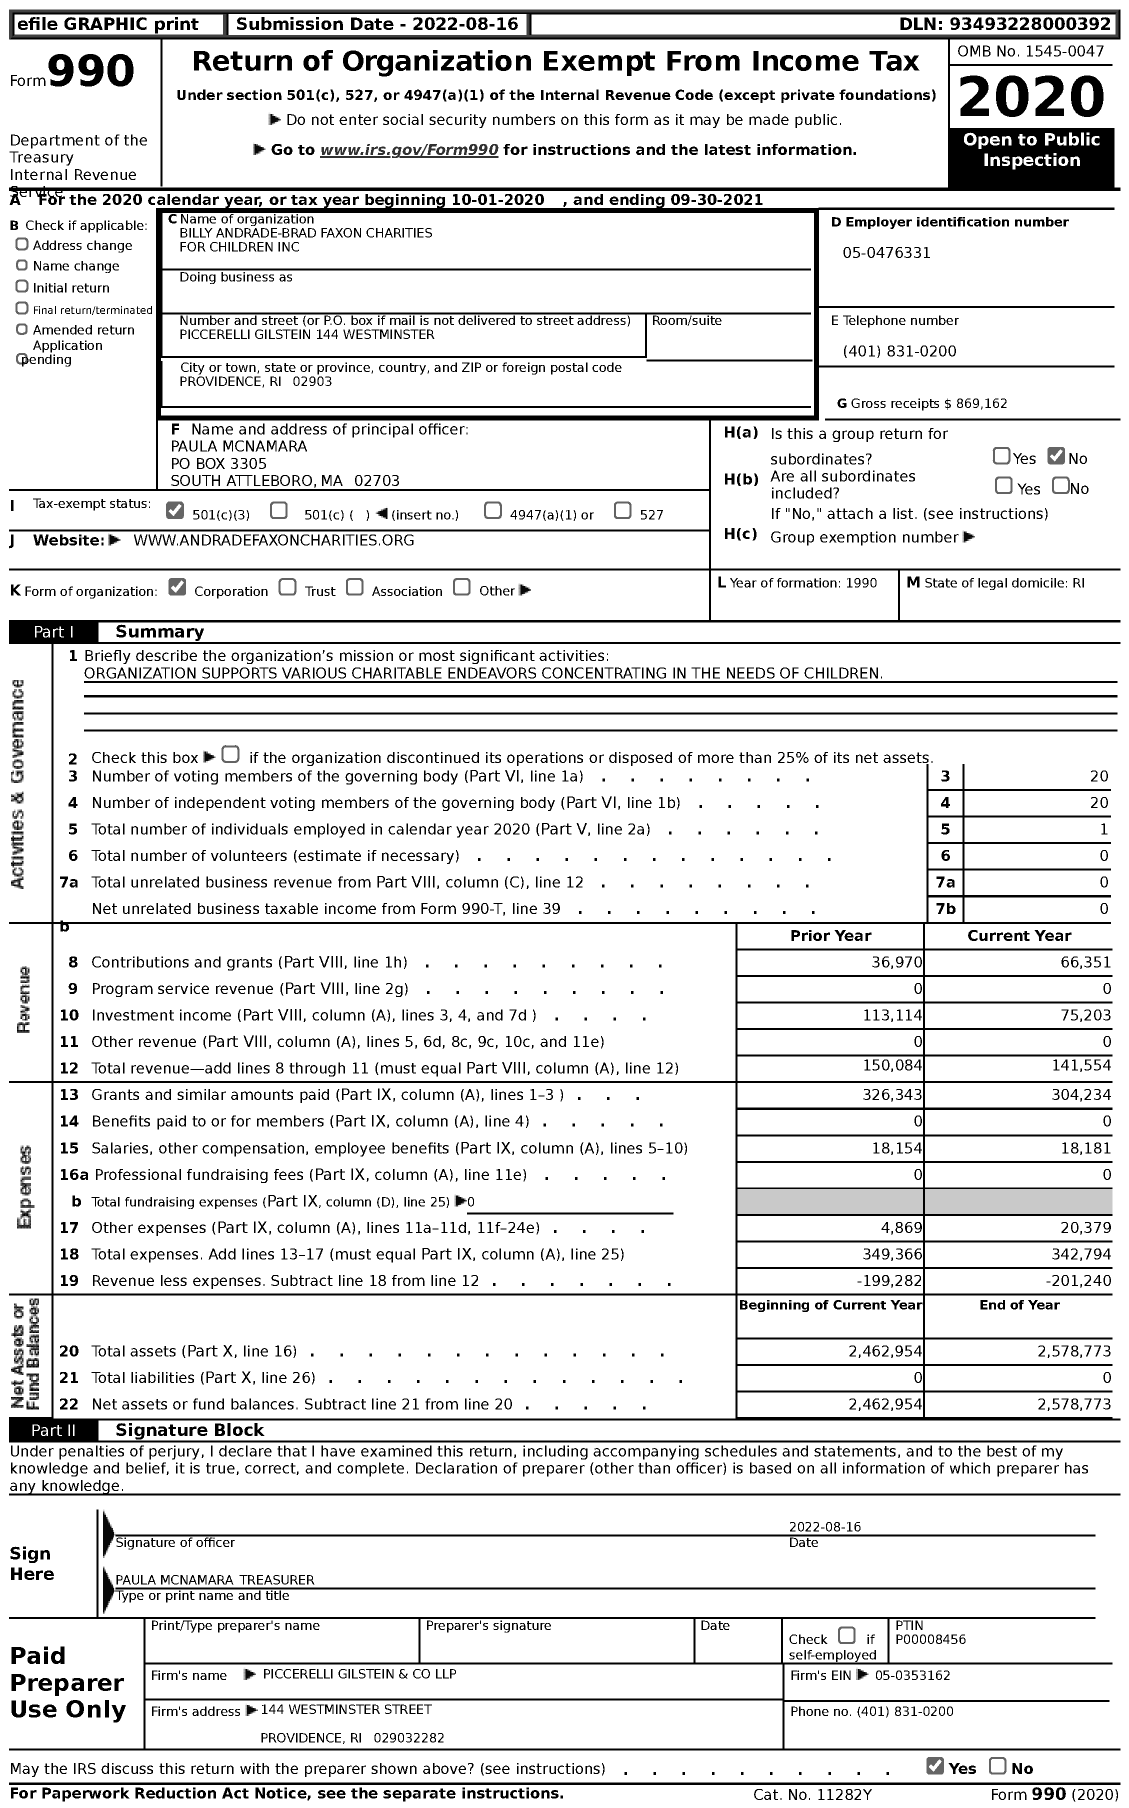 Image of first page of 2020 Form 990 for Billy Andrade-Brad Faxon Charities for Children